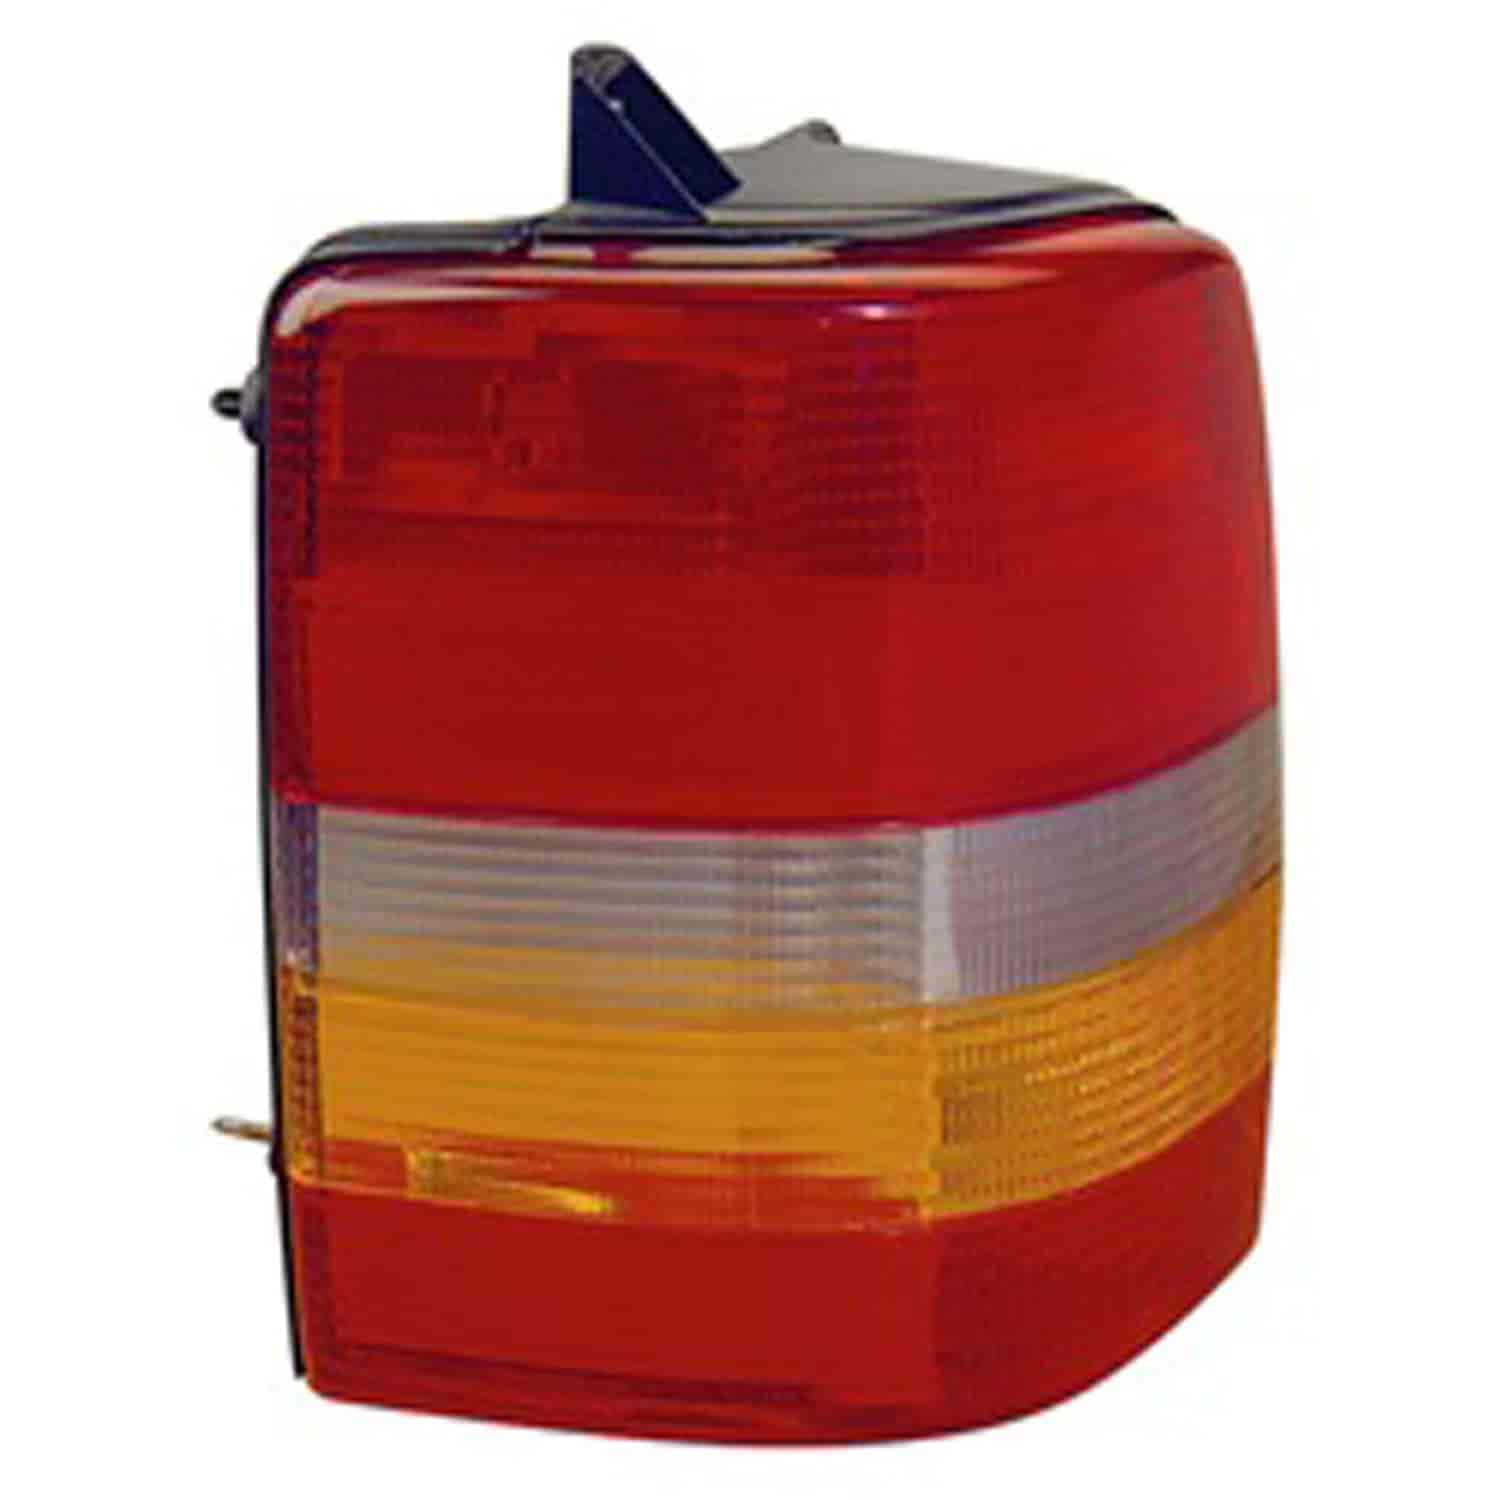 Replacement tail light assembly from Omix-ADA, Fits left side of 93-98 Jeep Grand Cherokee ZJ